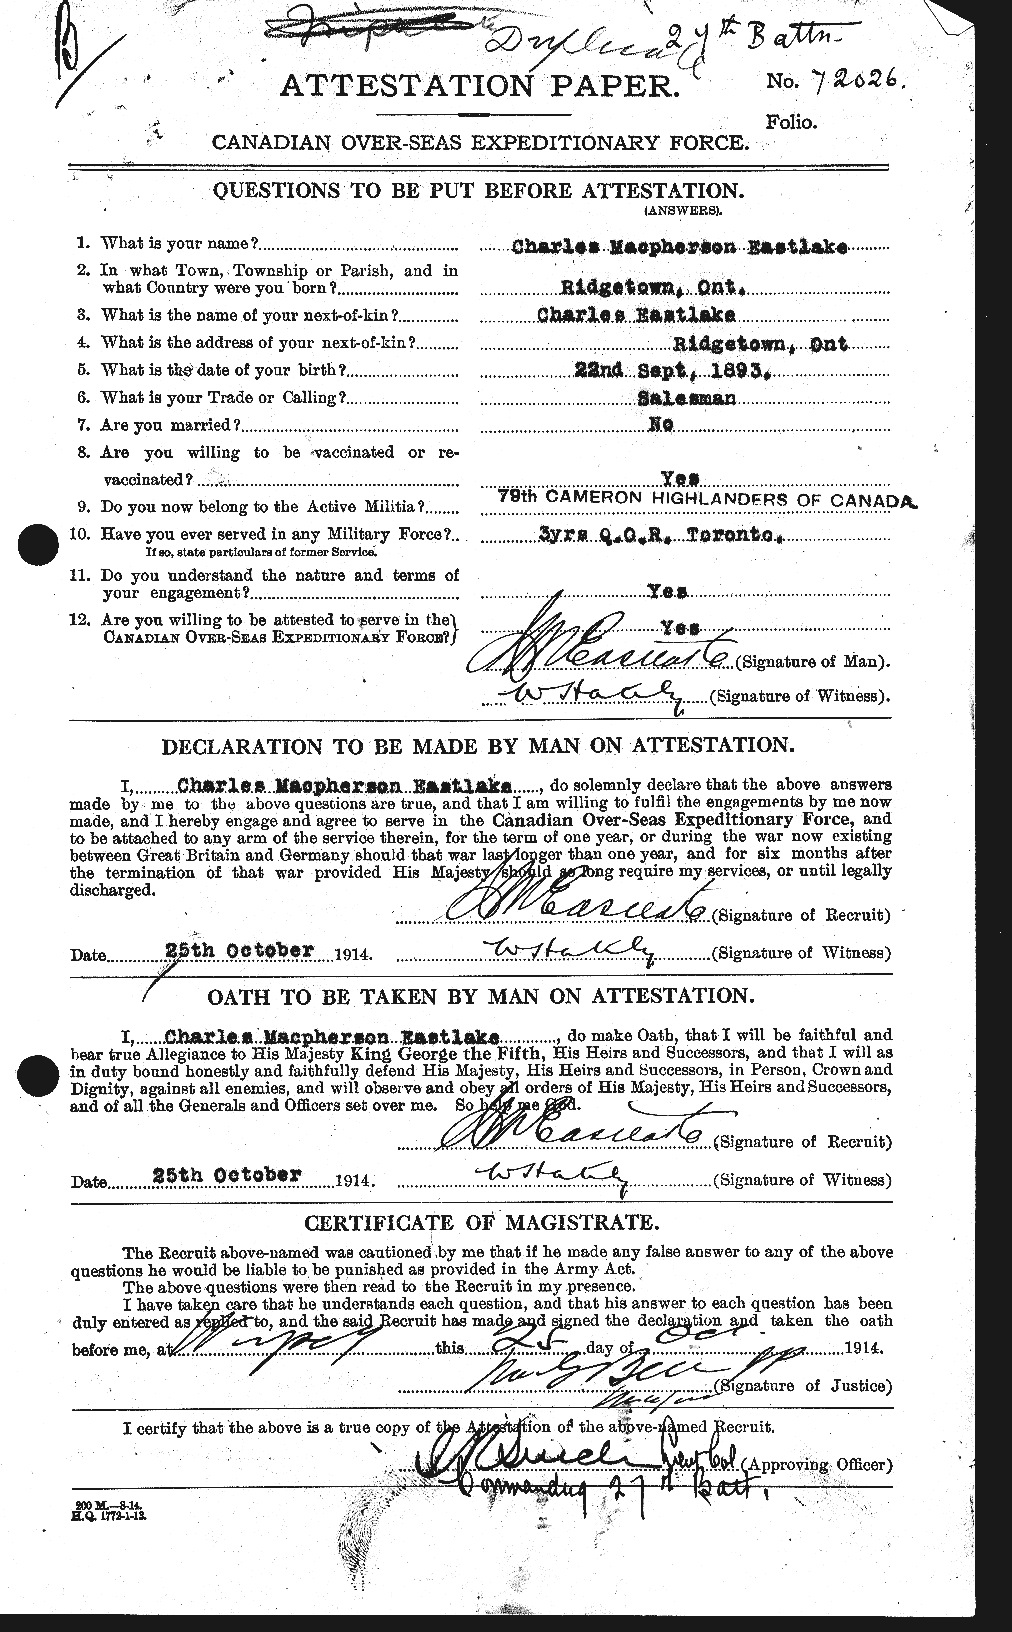 Personnel Records of the First World War - CEF 307933a